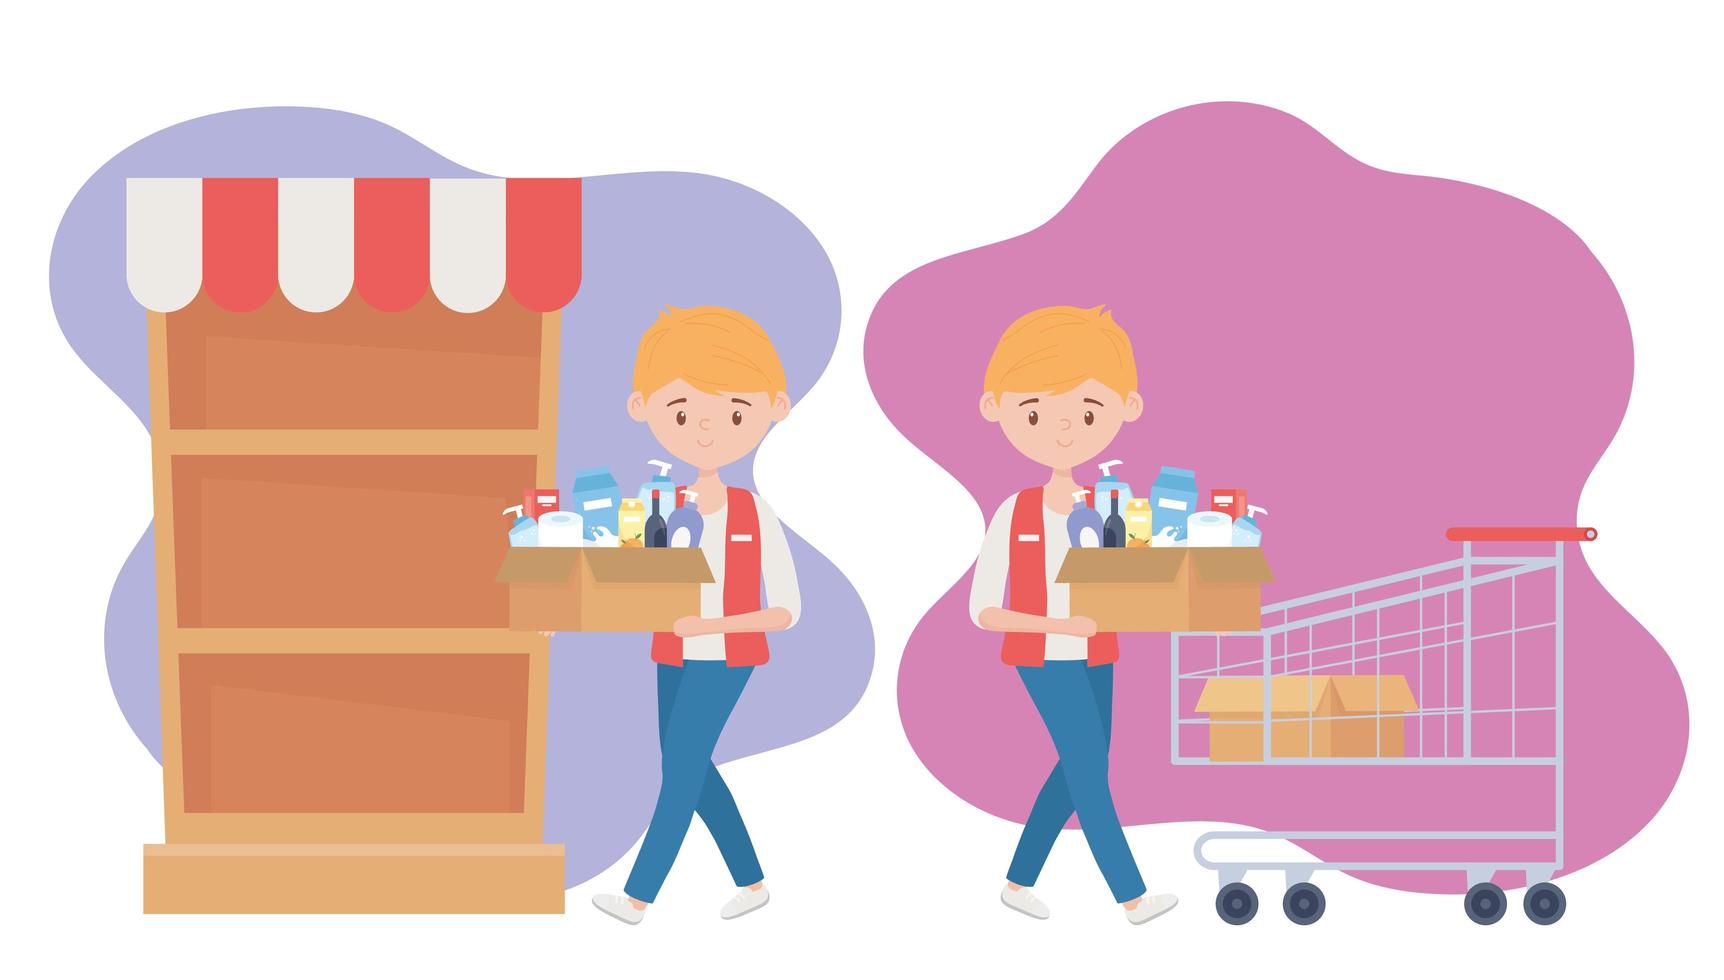 seller guy with boxes supermarket shelf cart food excess purchase vector